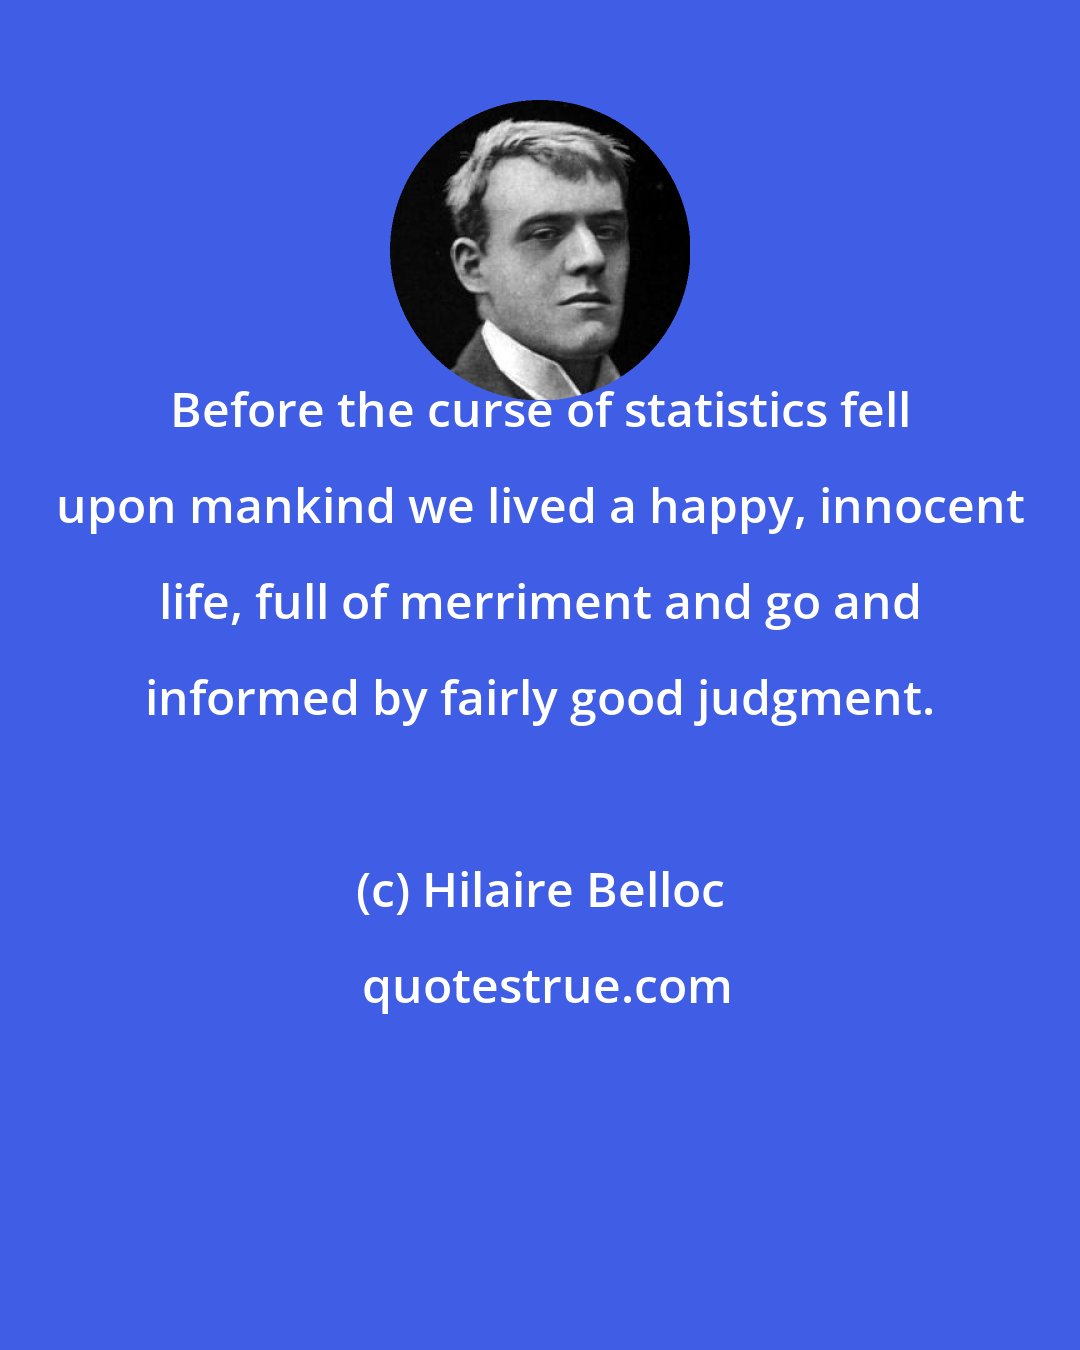 Hilaire Belloc: Before the curse of statistics fell upon mankind we lived a happy, innocent life, full of merriment and go and informed by fairly good judgment.